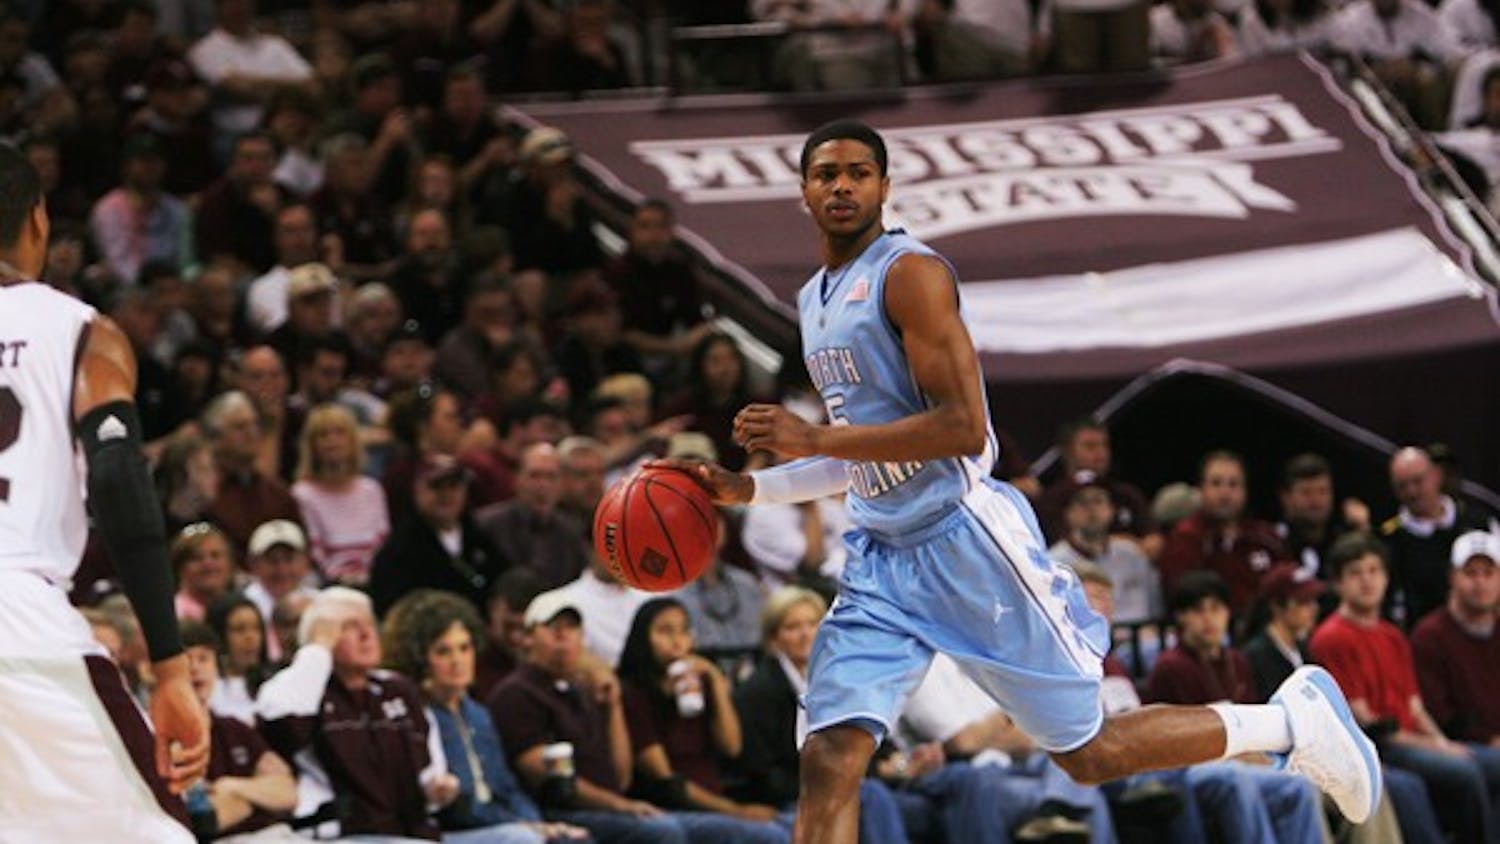 Freshman Dexter Strickland scored eight points and two assists off the bench for North Carolina. DTH/Jordan lawrence